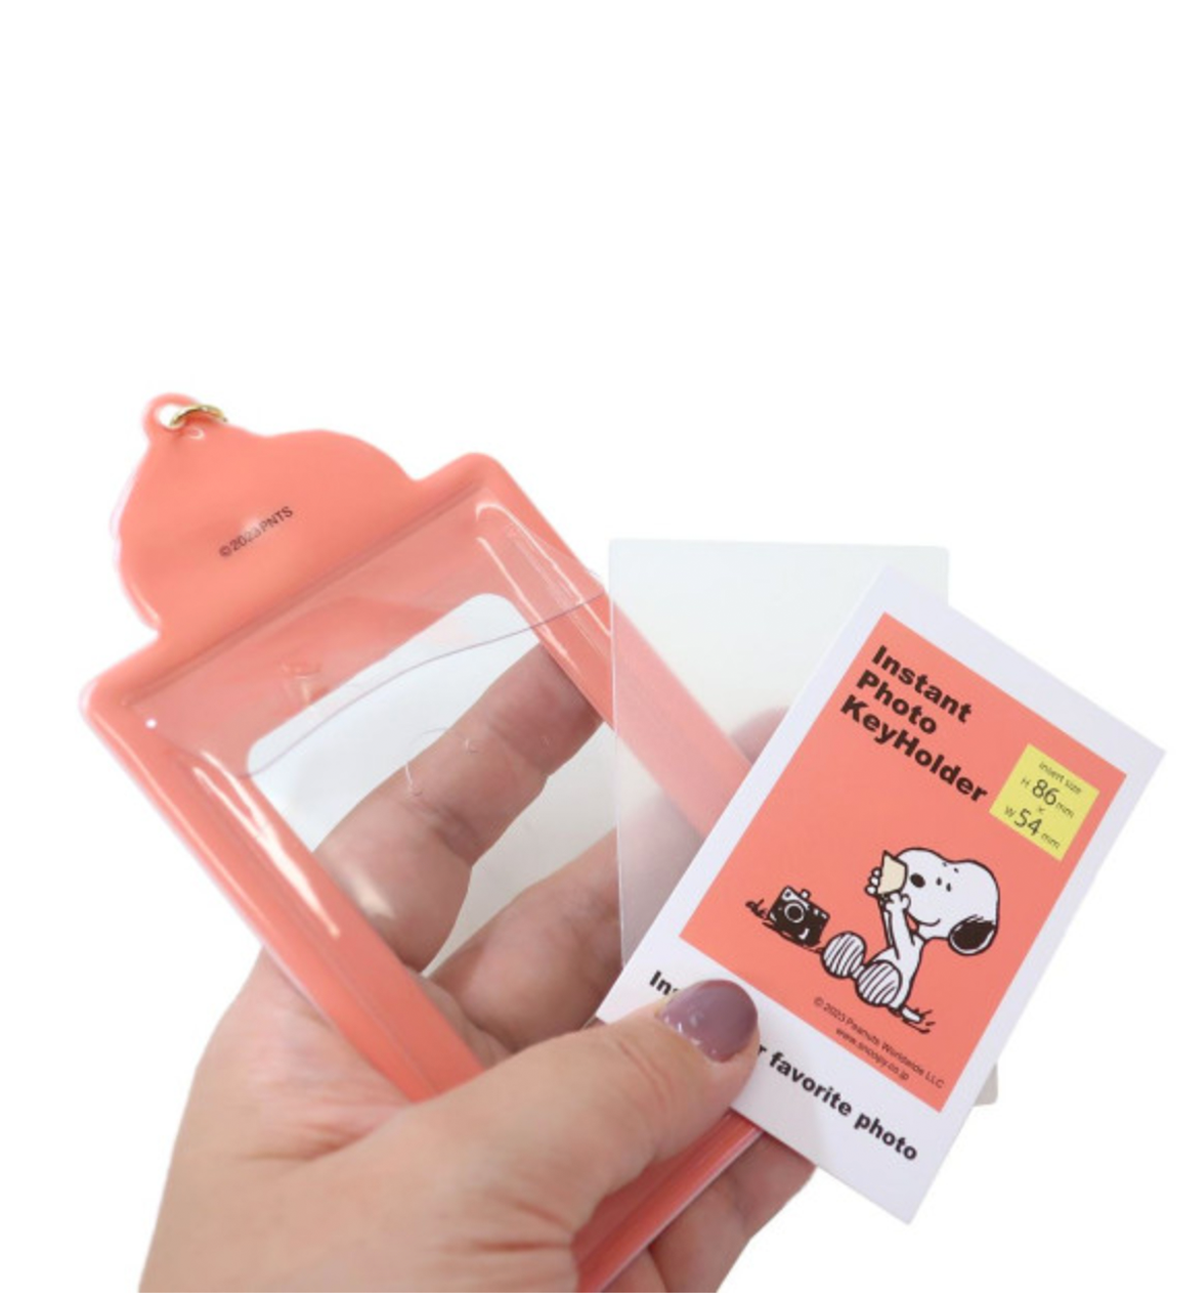 Snoopy & Friends Photocard Holder [Orange Red]